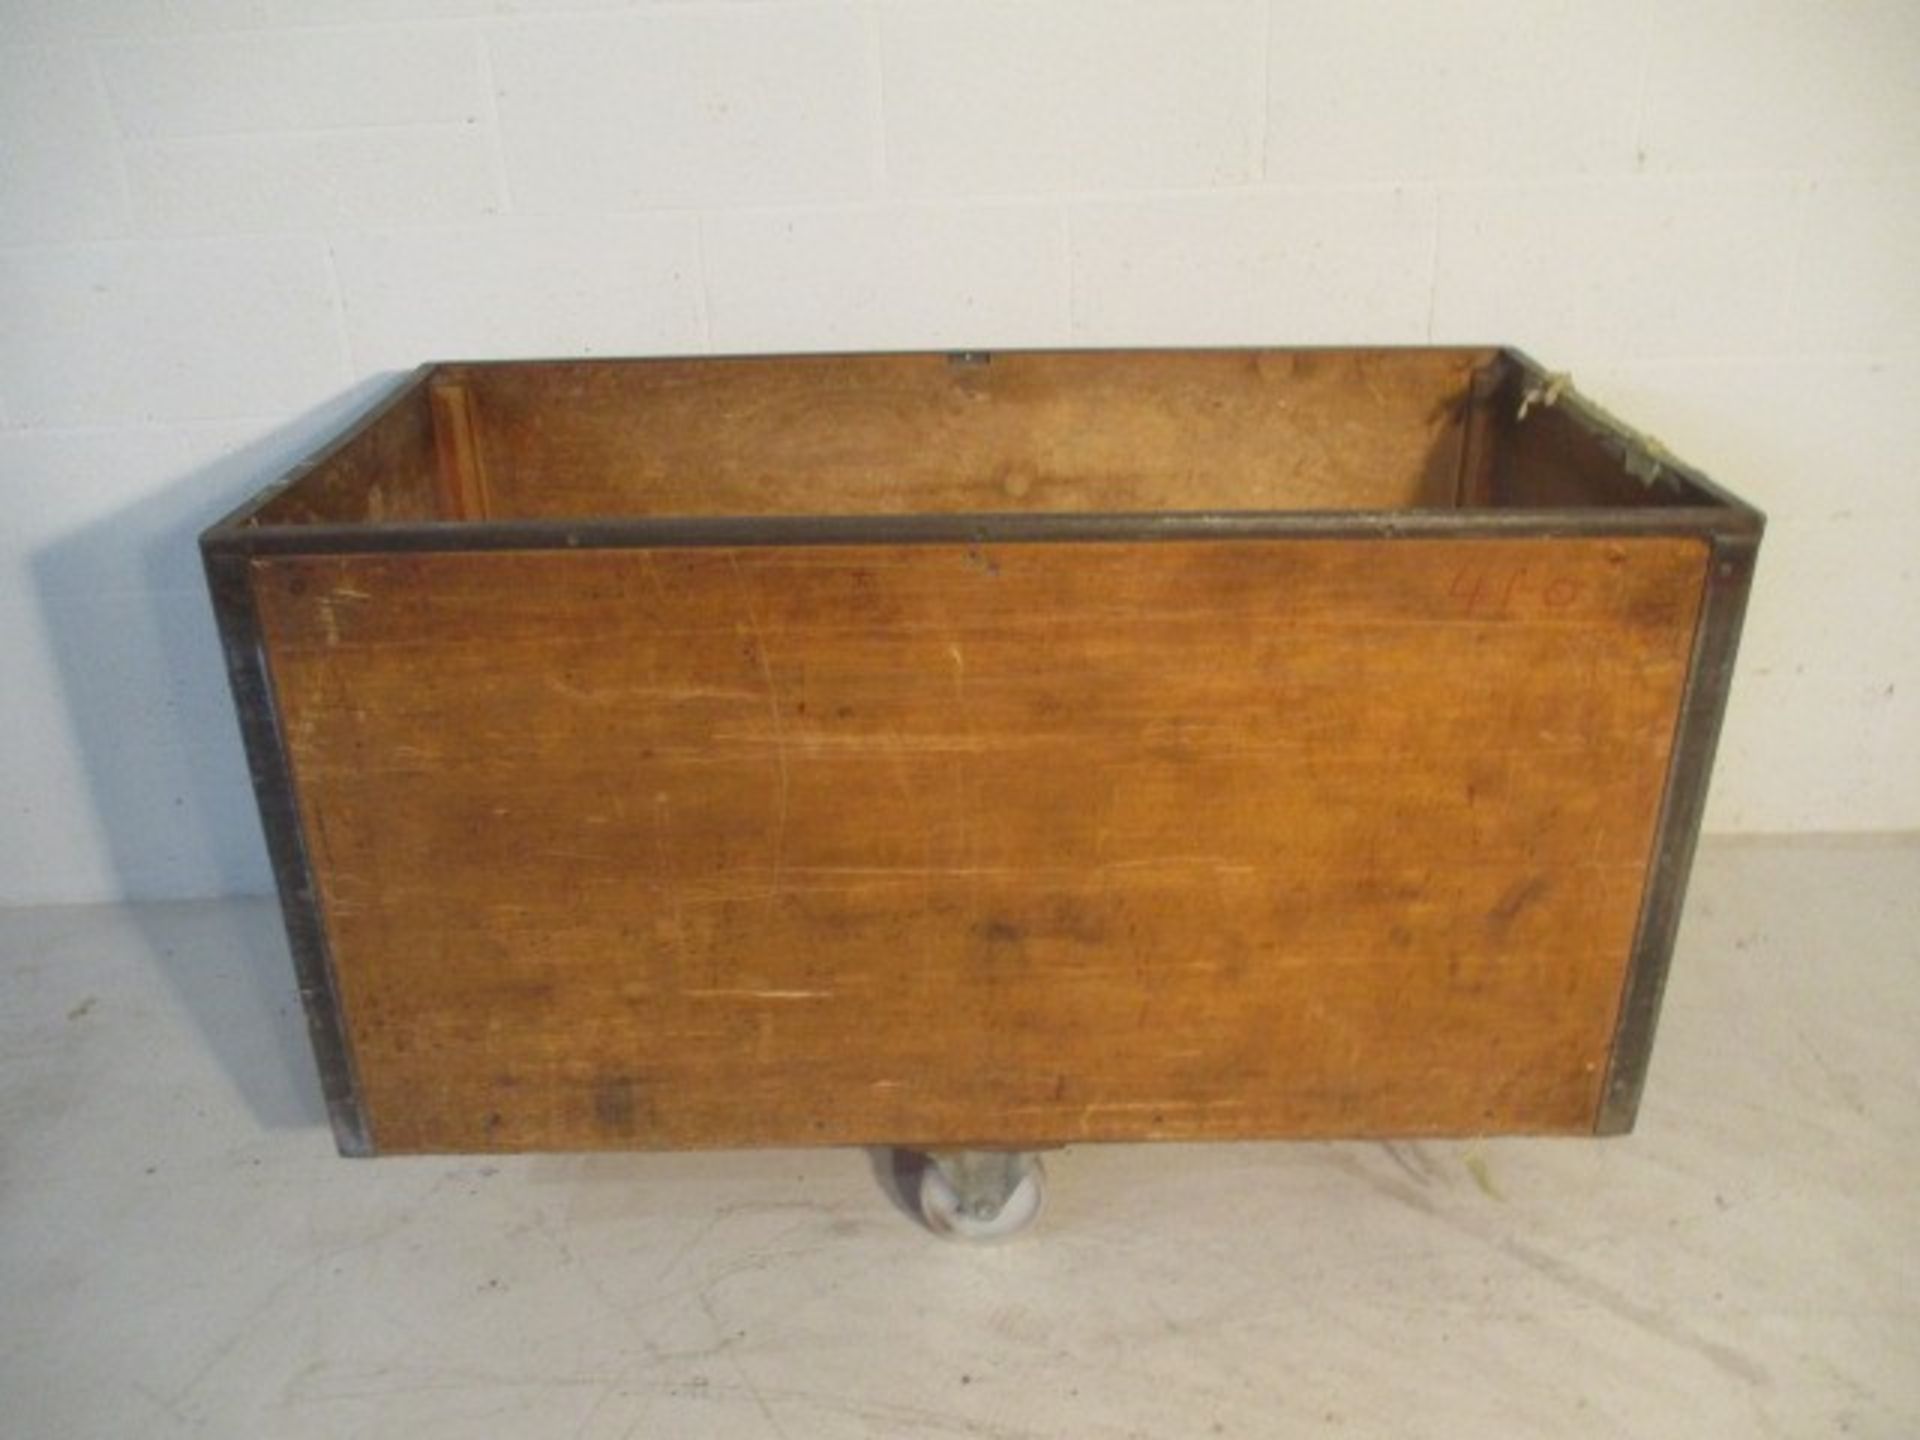 A wooden trolley with metal edging, 123 cm x 62 cm